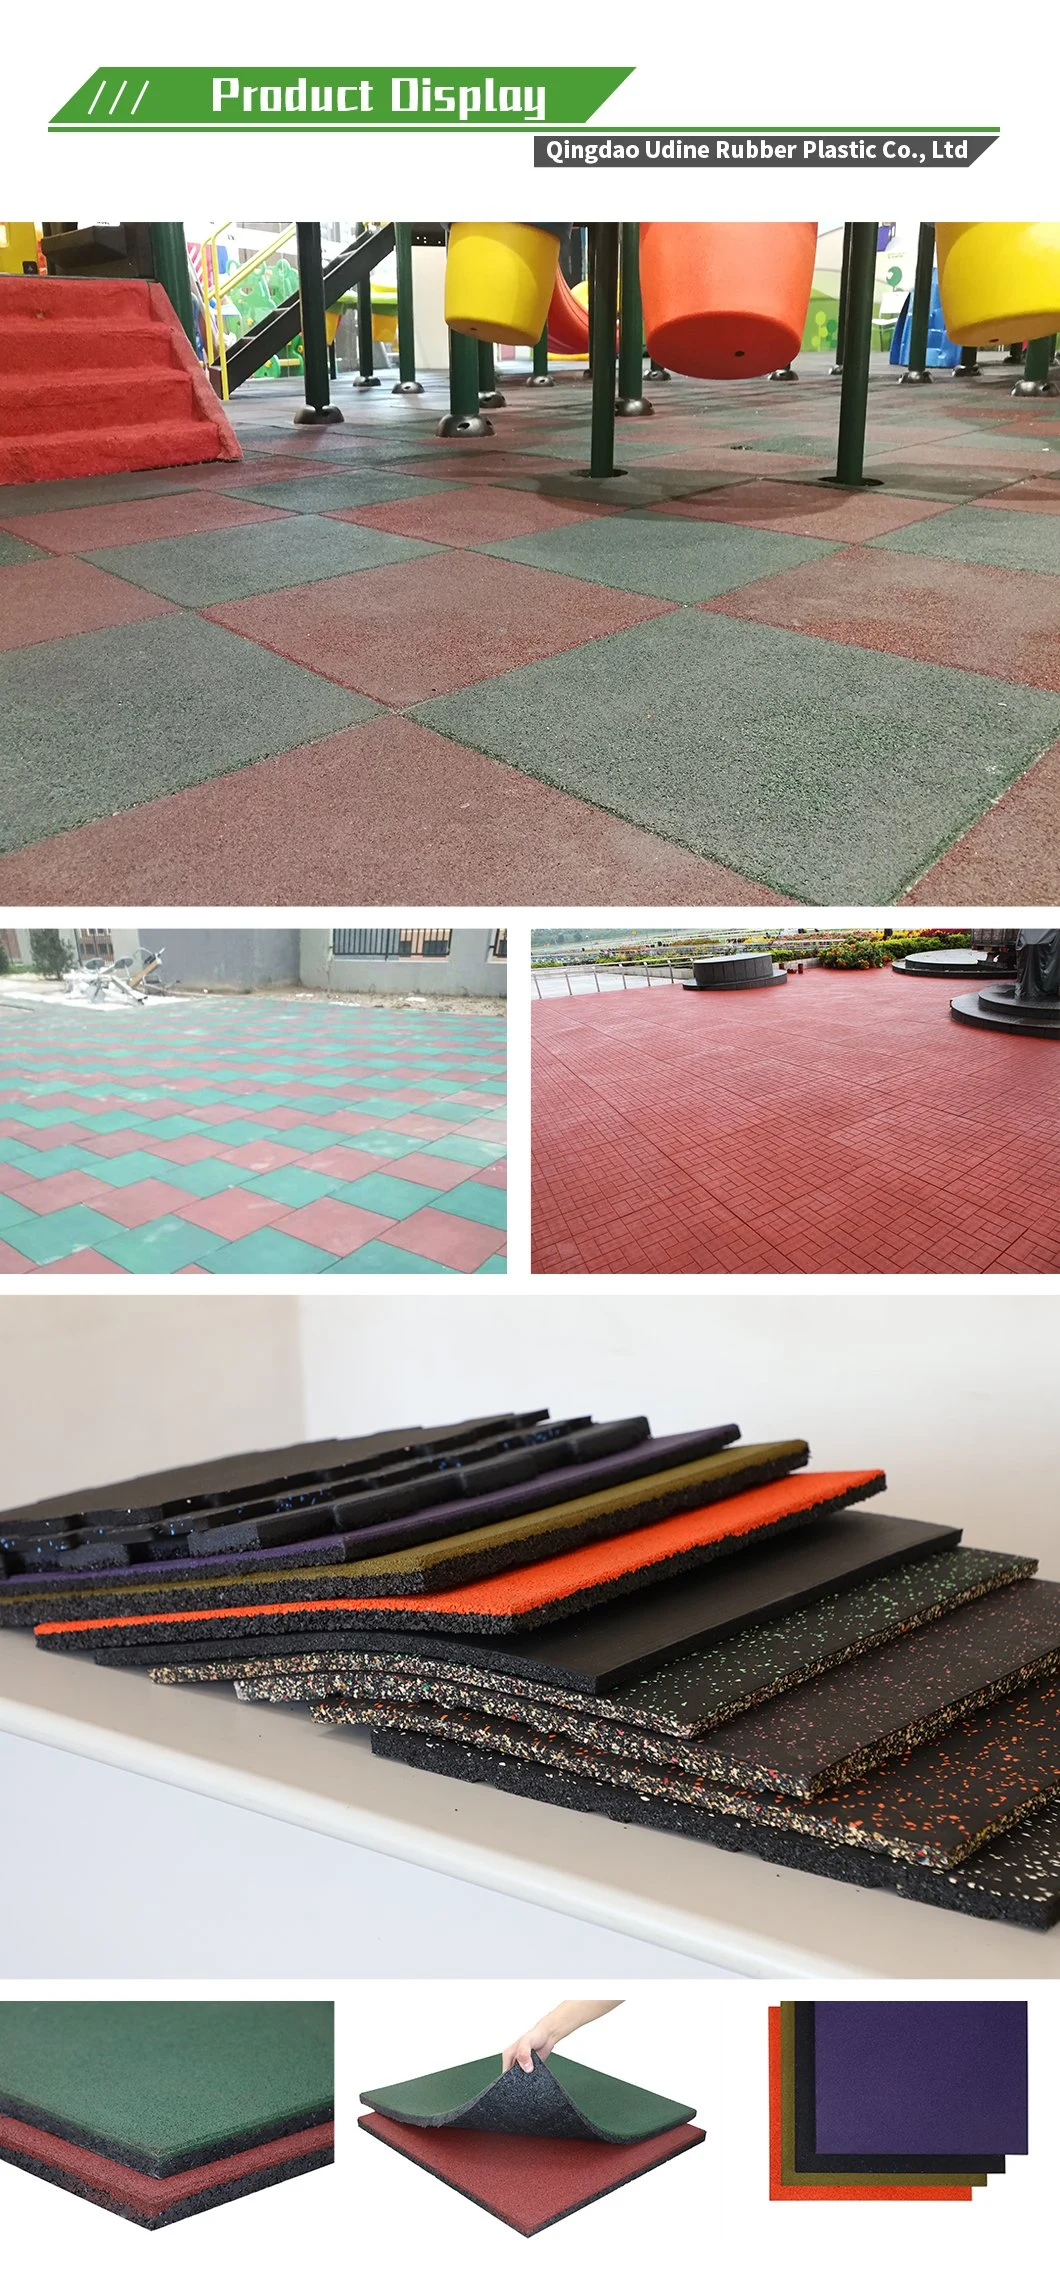 Heavy Duty Recycled Outdoor Interlocking Puzzle Fitness Sport Paver Shock Absorbent Crossfit EPDM Playground Gym Rubber Rolls Tiles Mats Flooring for Equipment